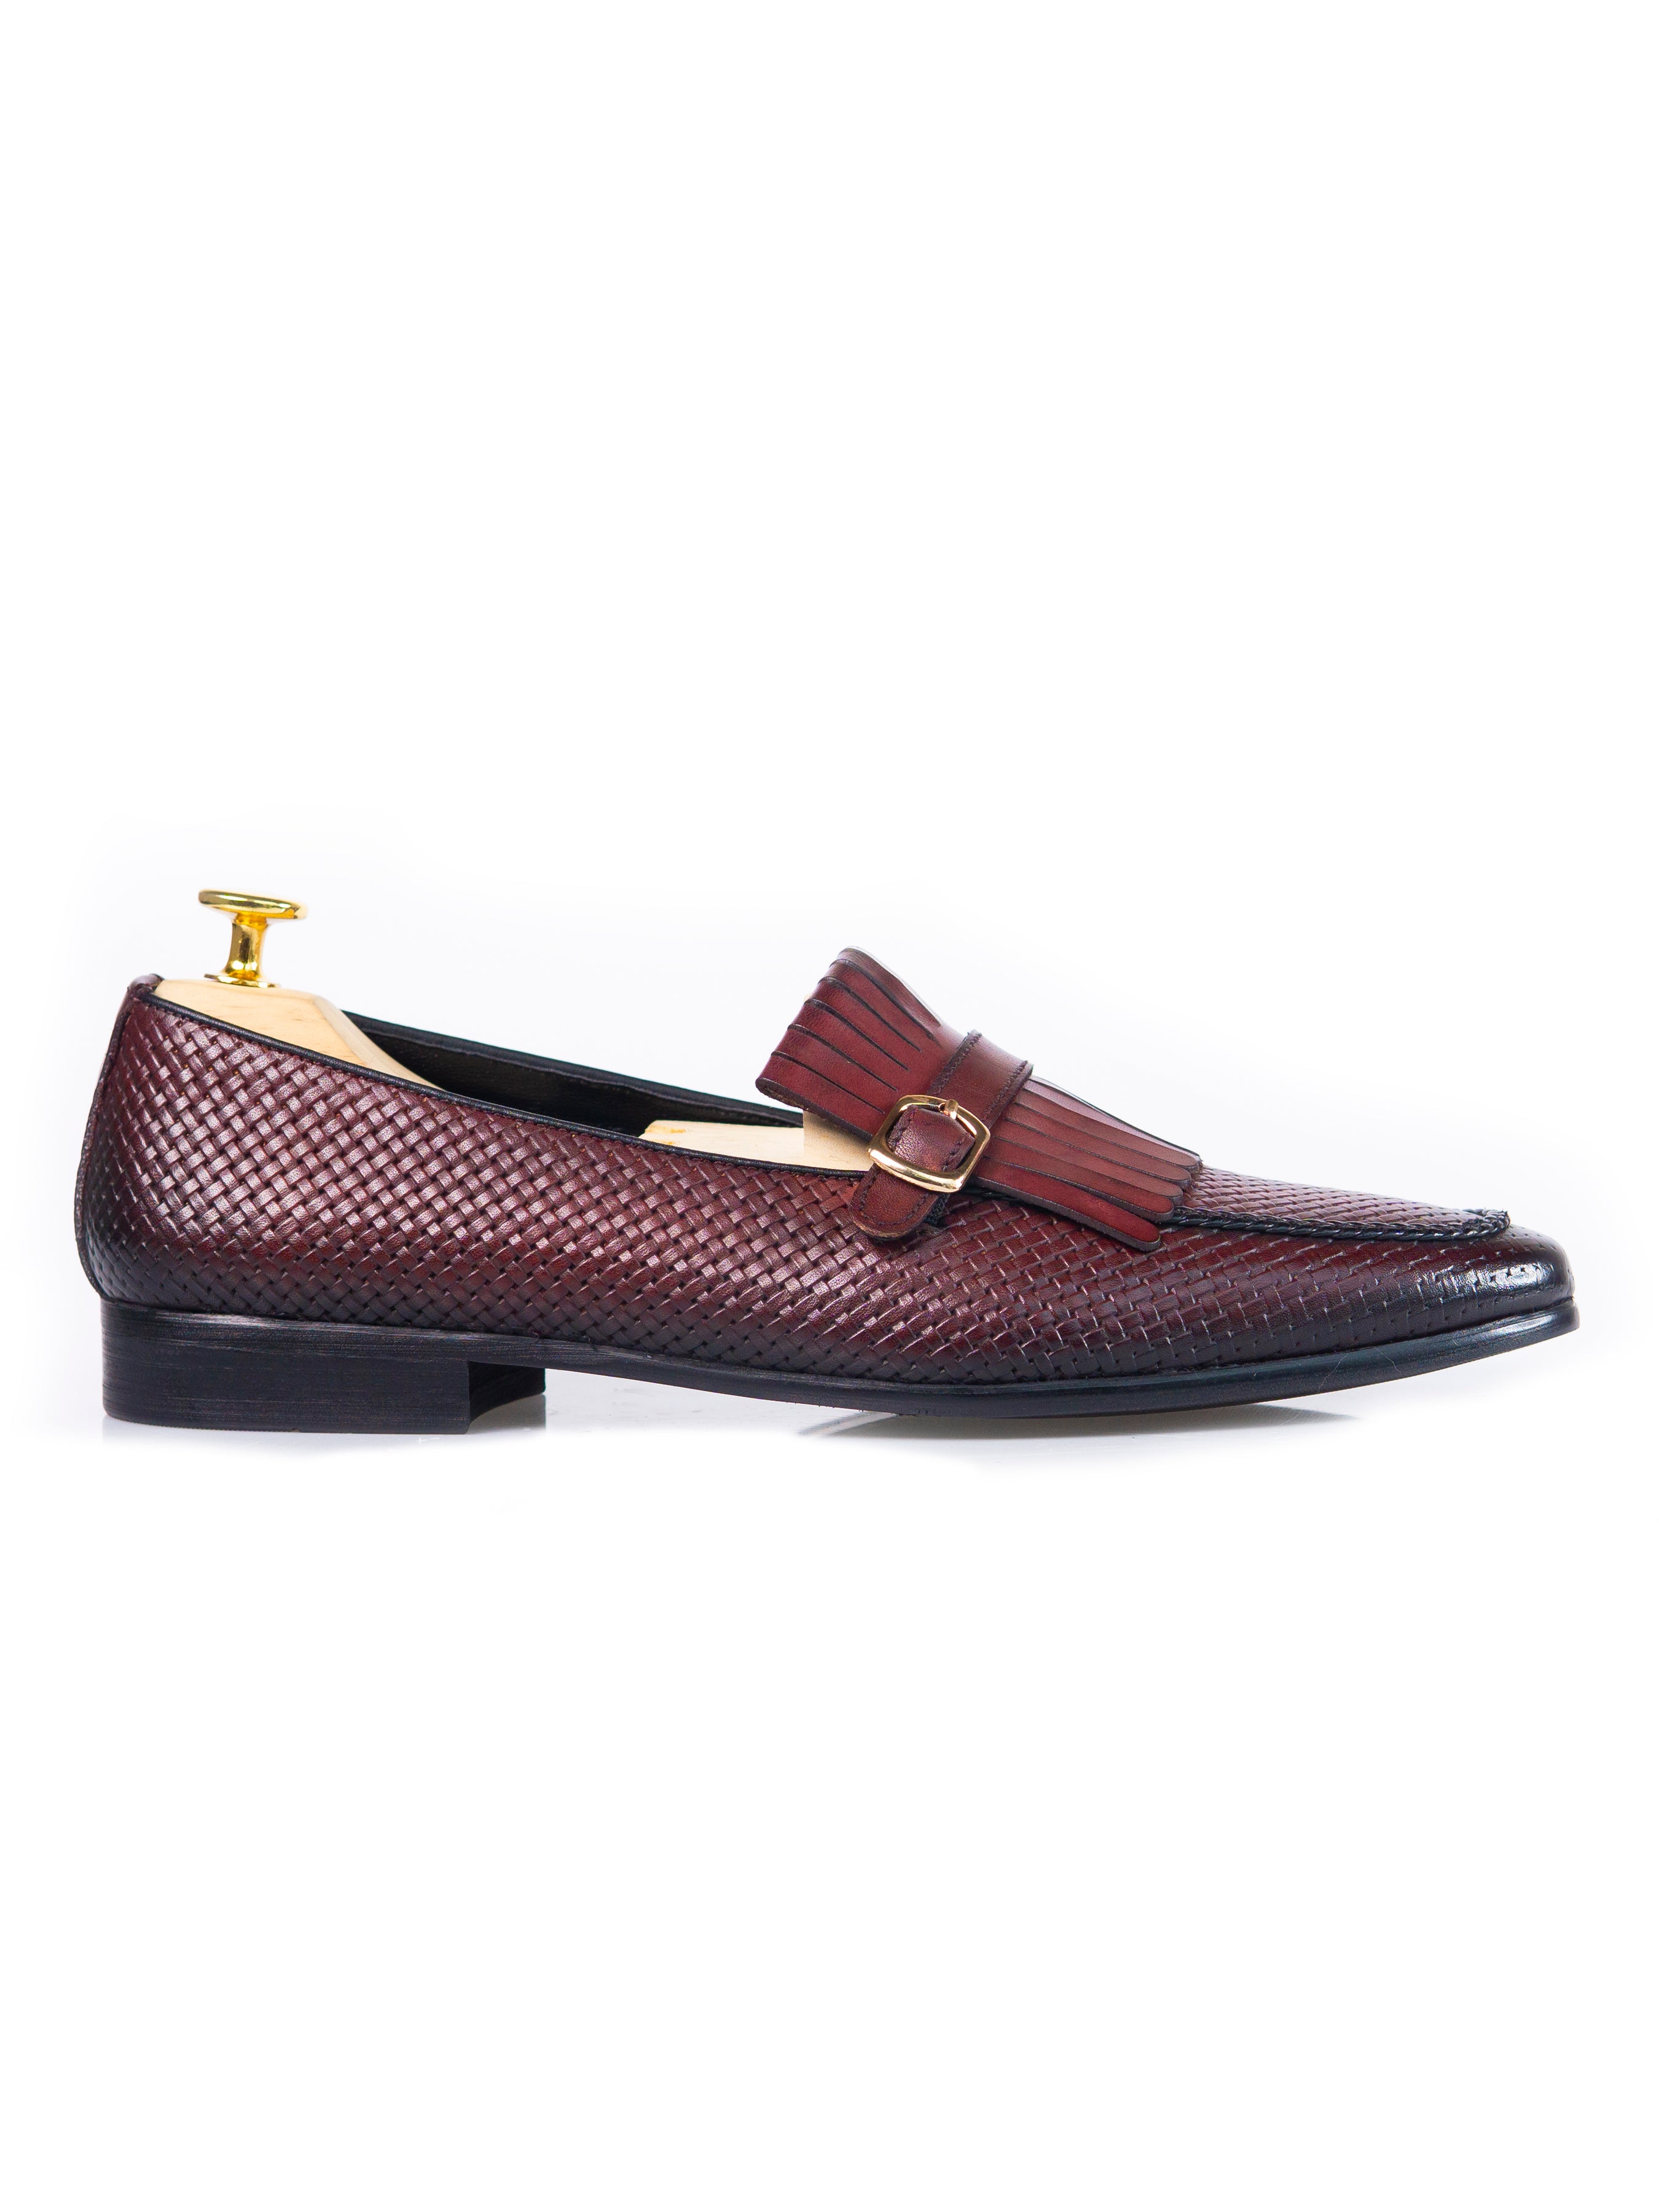 Fringe Kiltie Loafer - Red Burgundy Woven Leather with Side Buckle (Hand Painted Patina)